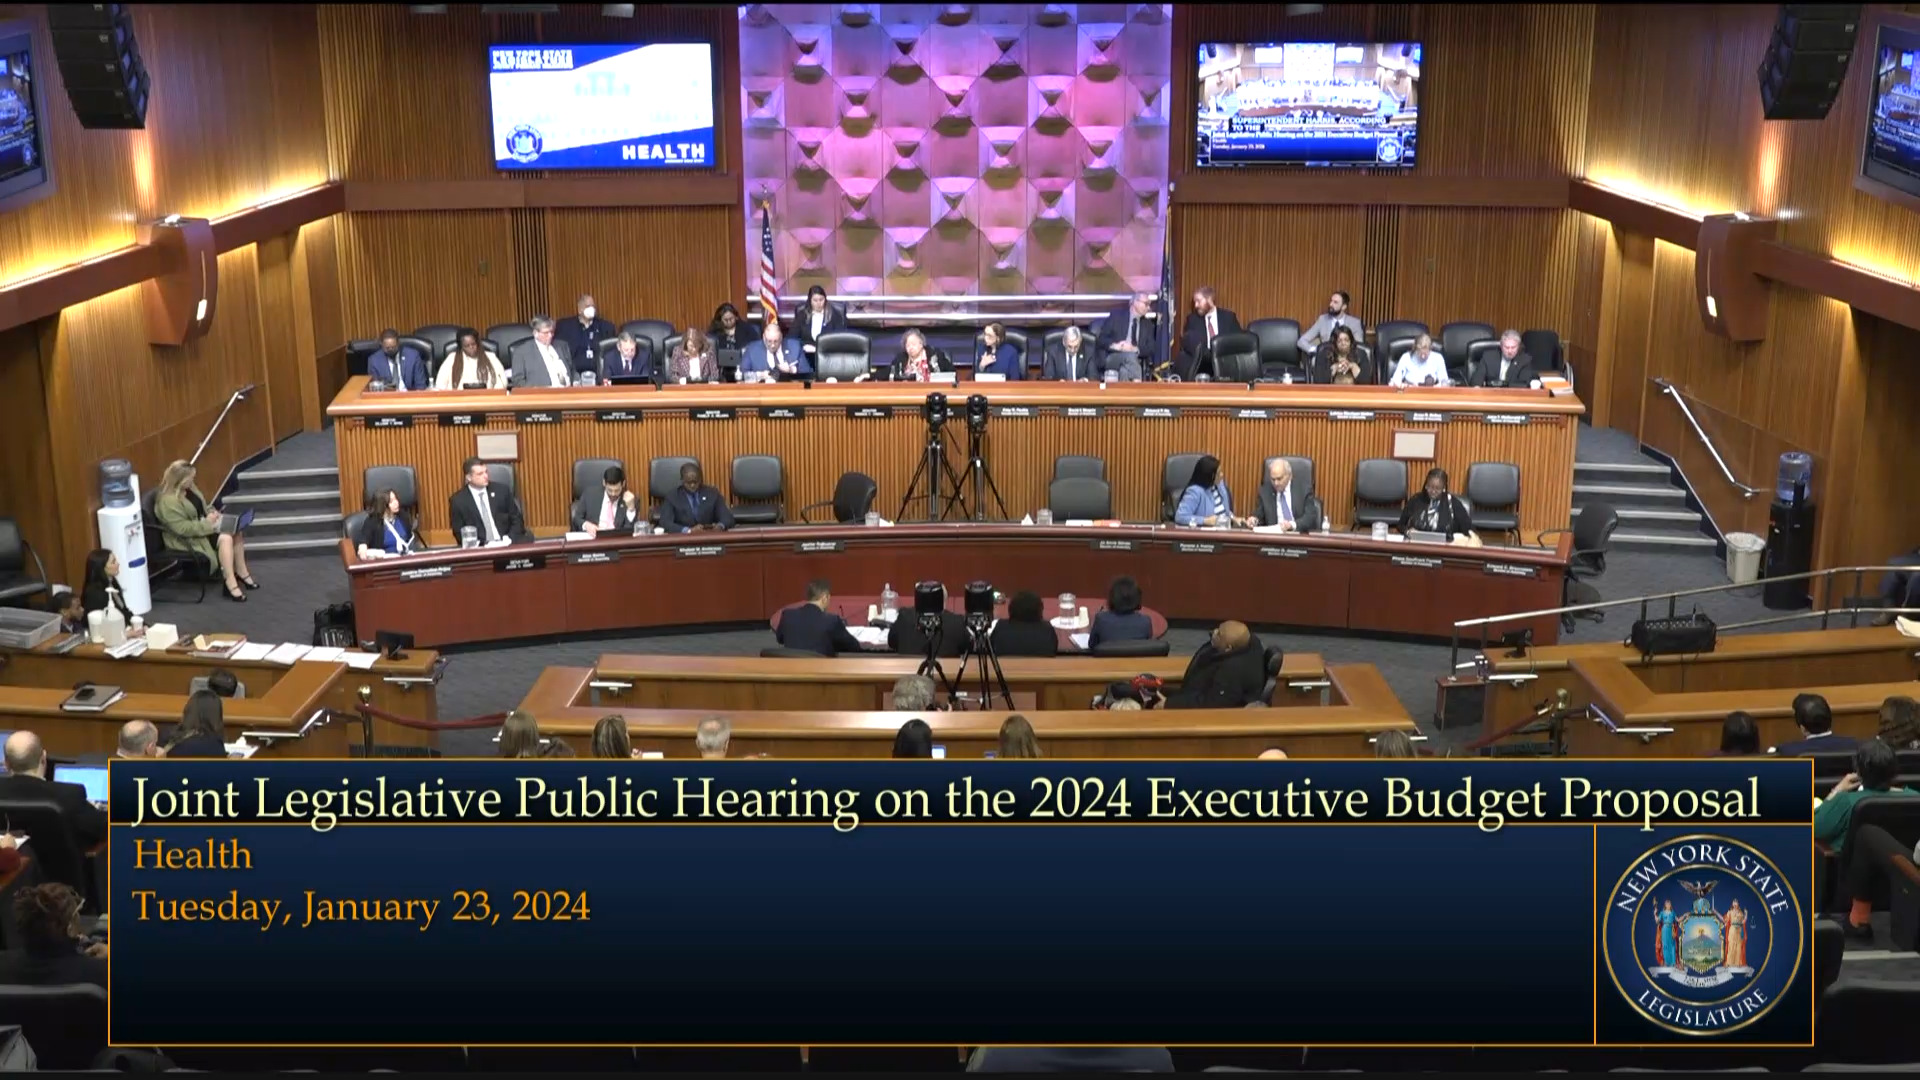 Forrest Questions Health Commissioner During Budget Hearing on Health